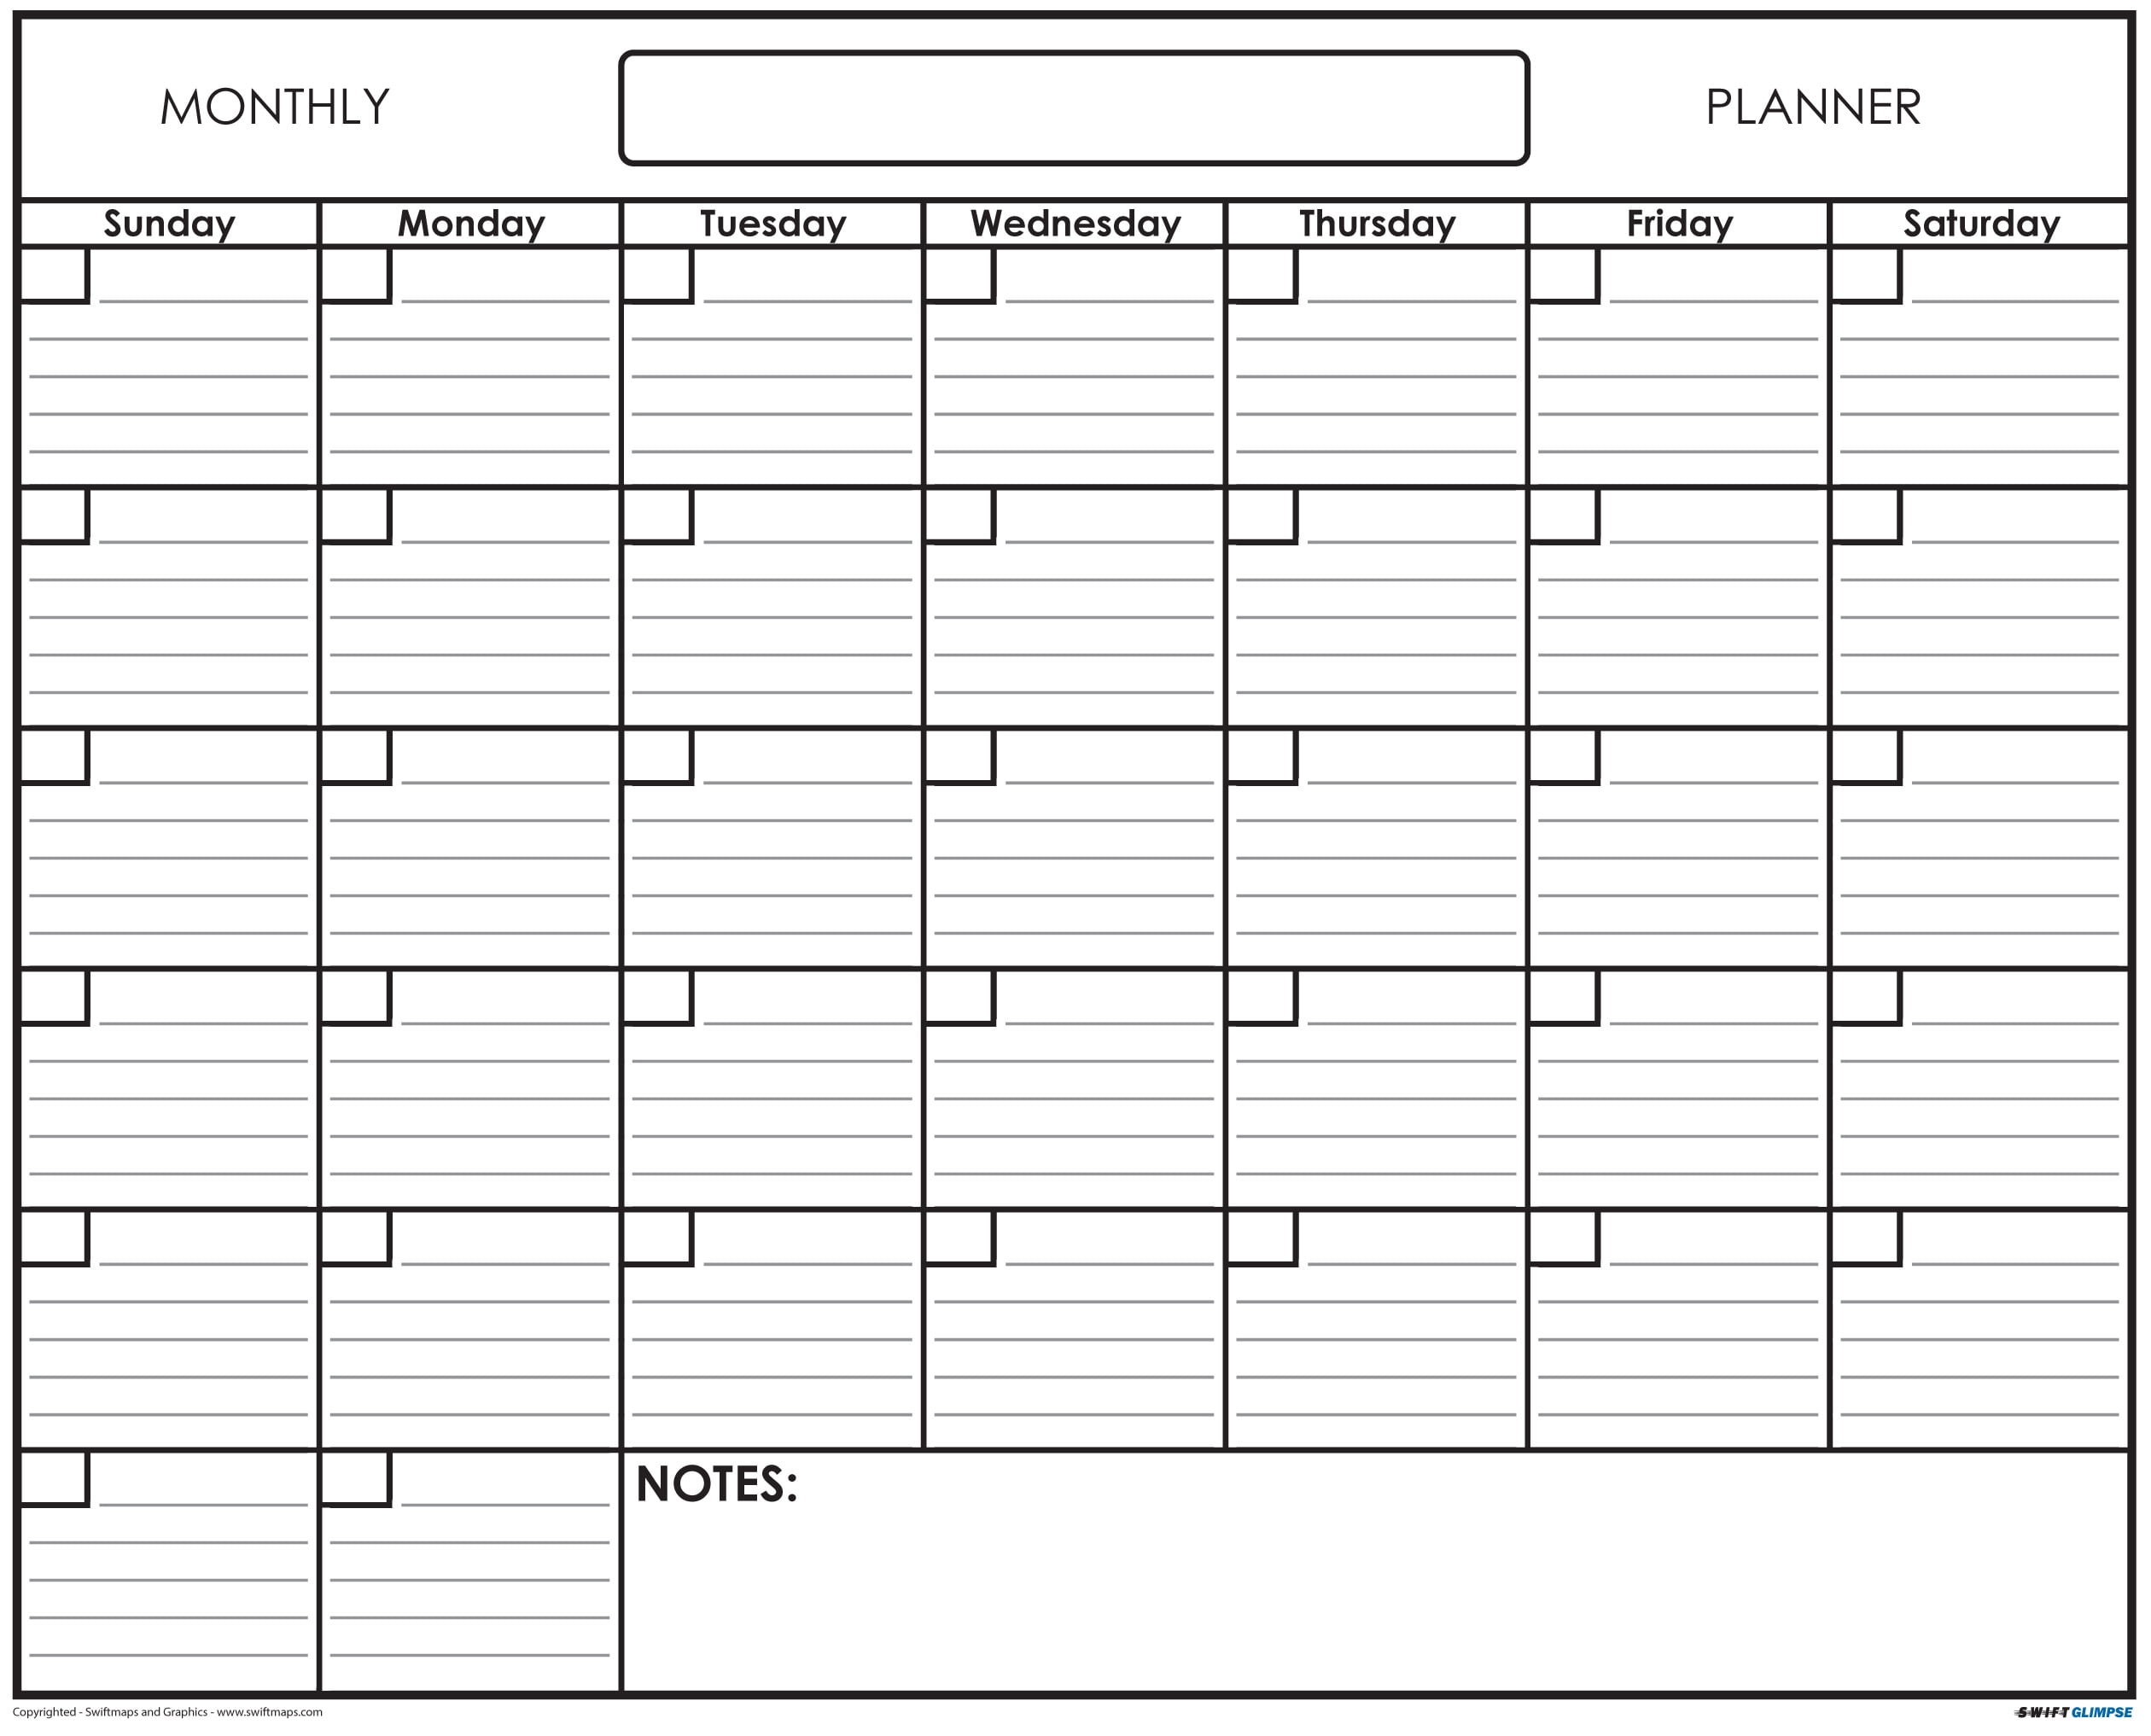 18x24 SwiftGlimpse Large Blank Reusable One Month Wall Calendar Wet & Dry Erase Laminated Monthly Wall Planner